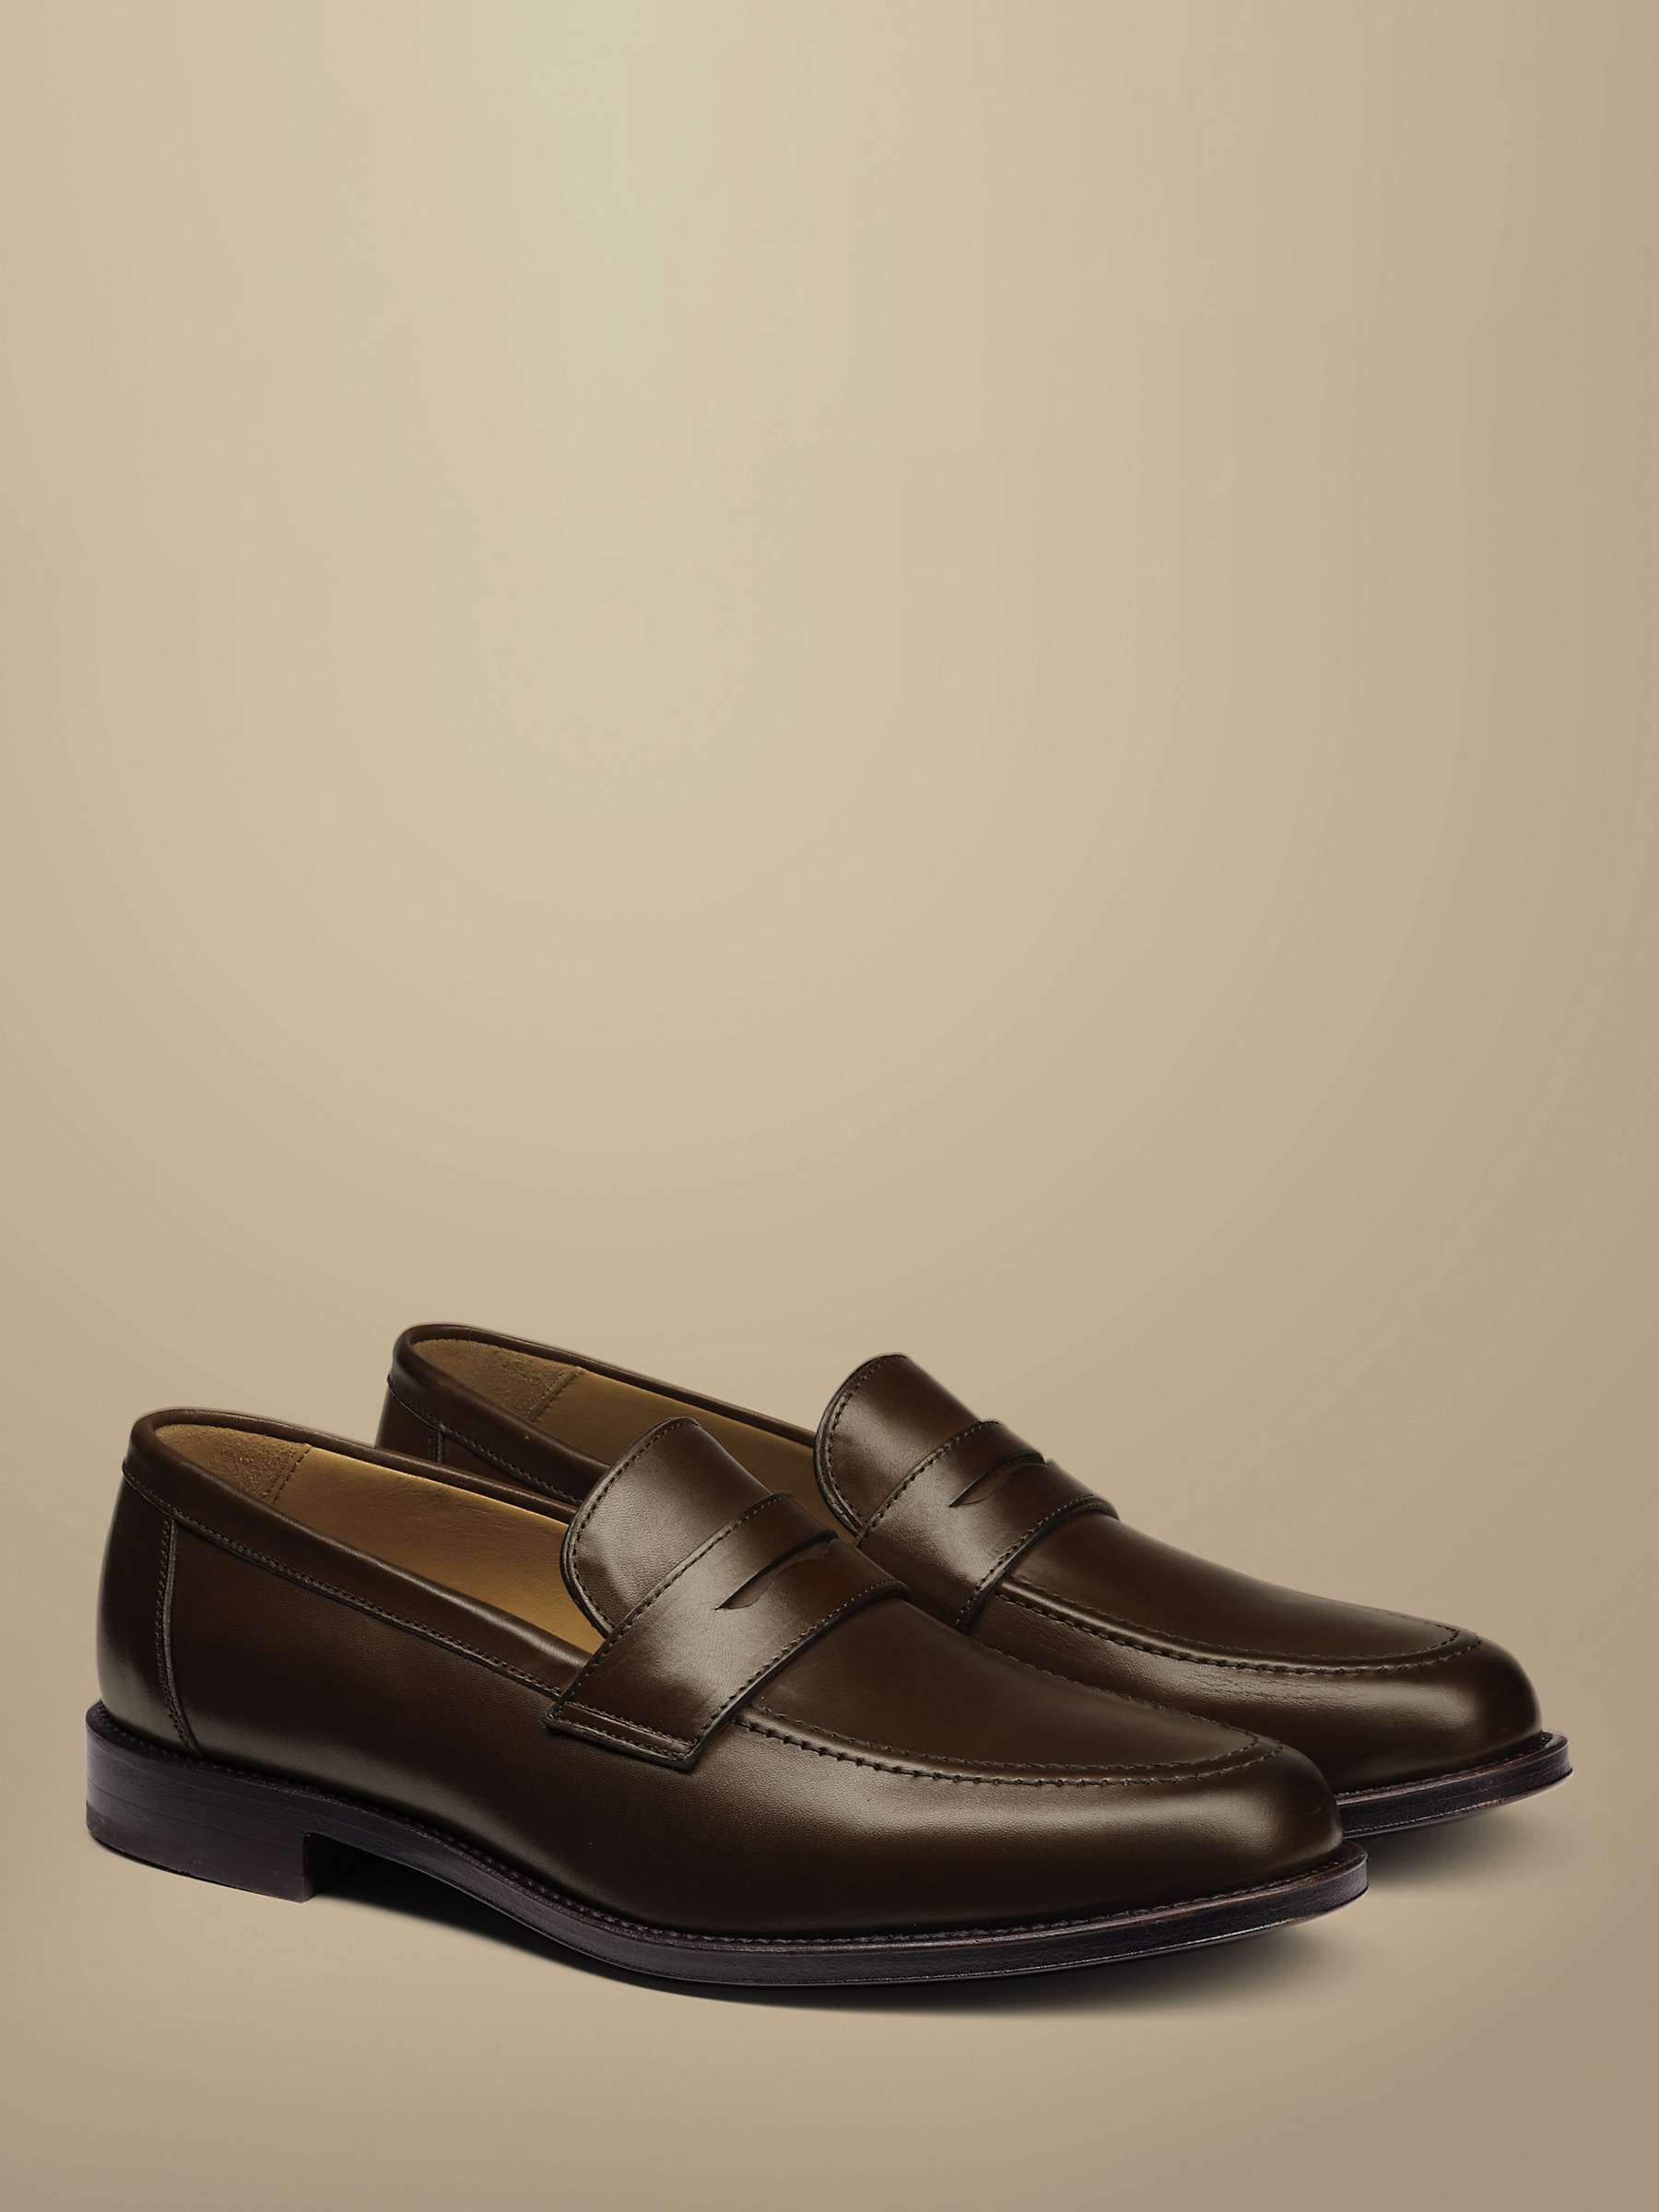 Buy Charles Tyrwhitt Leather Apron Loafers Online at johnlewis.com